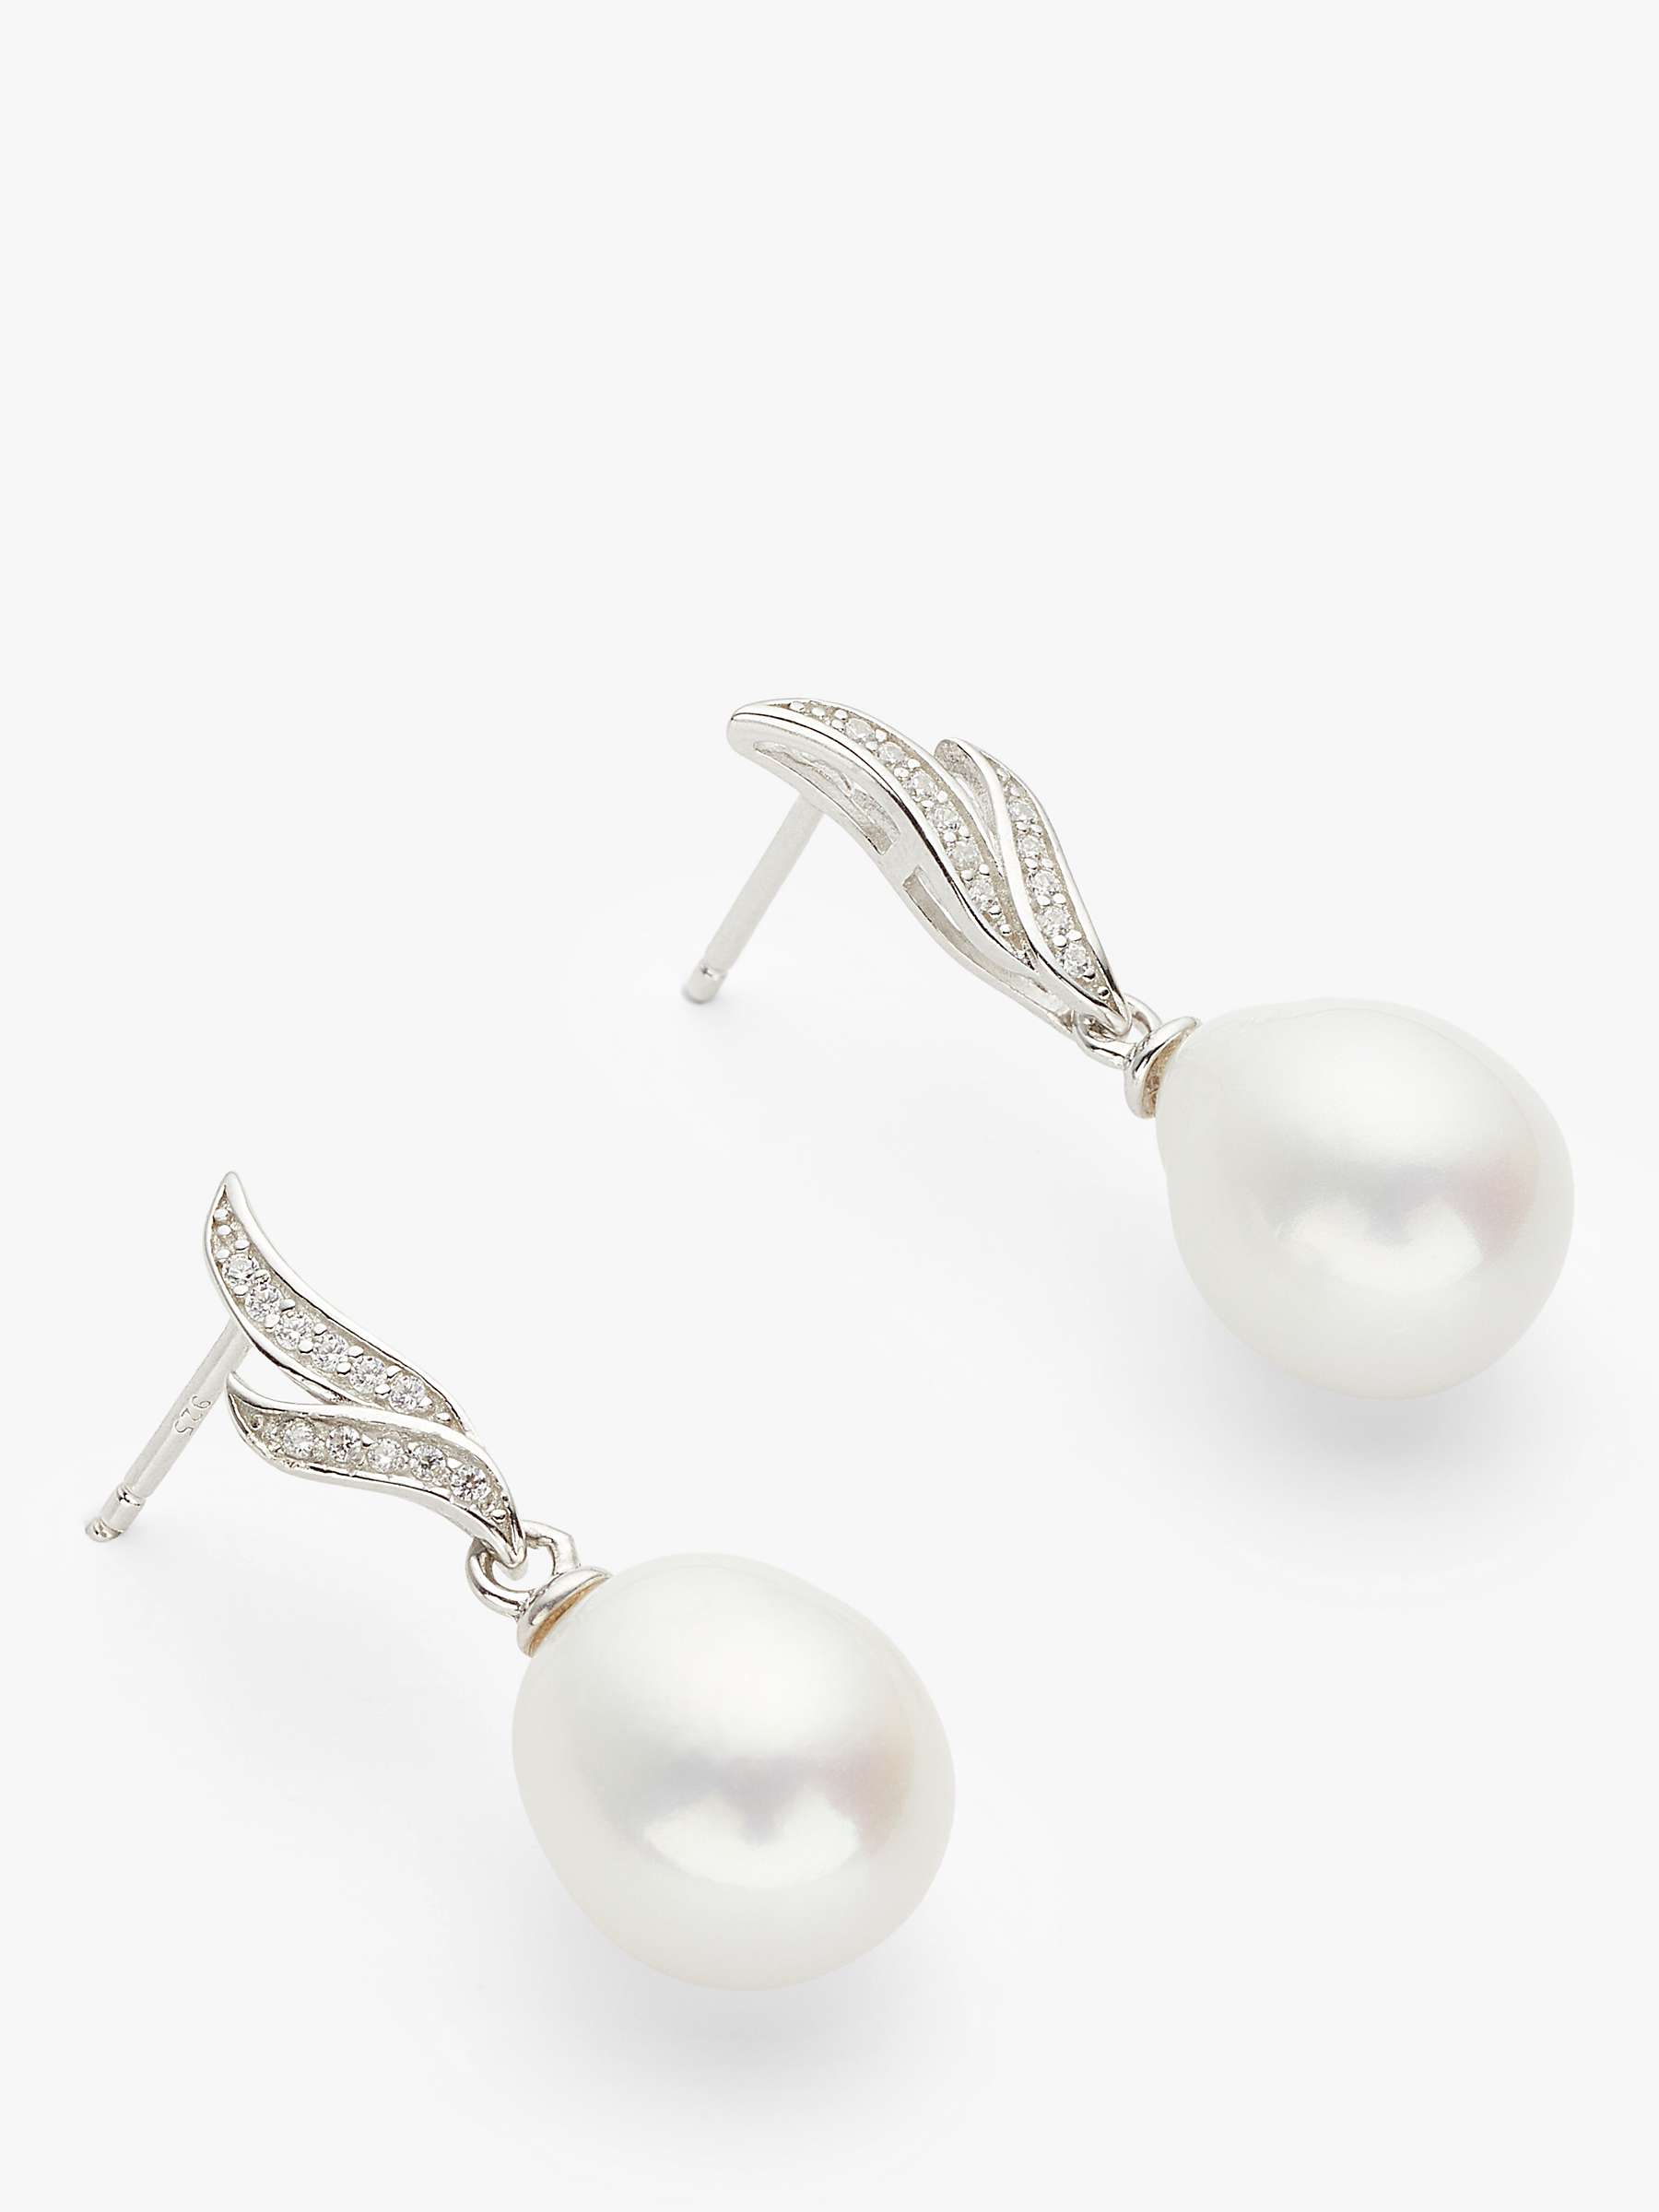 Buy Lido Cubic Zirconia Freshwater Pearl Double Leaf Stud Earrings, White/Silver Online at johnlewis.com